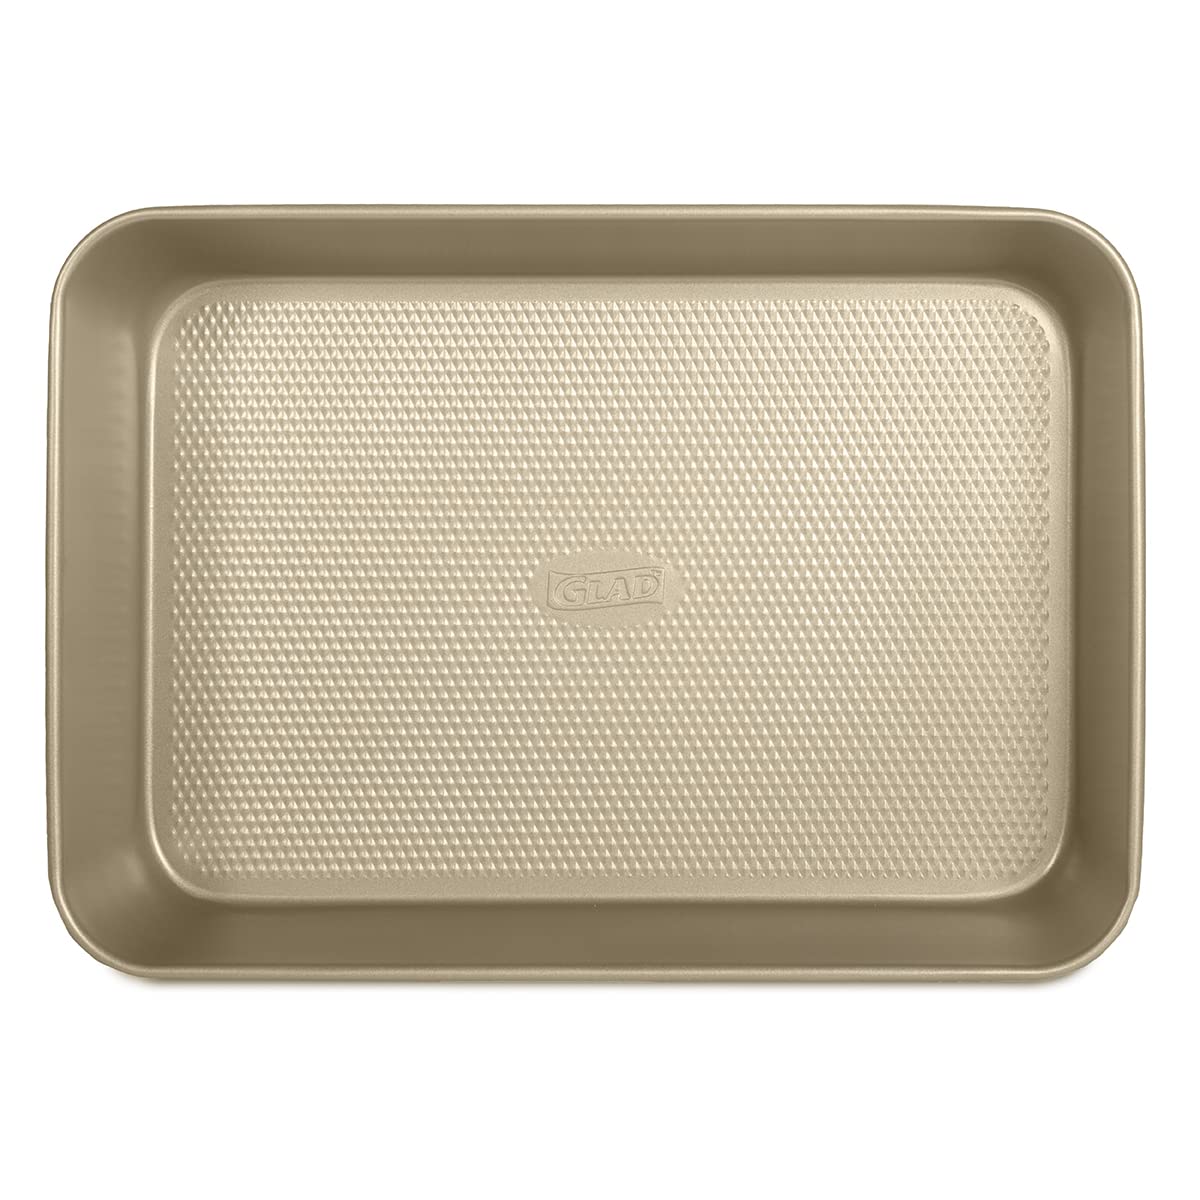 Glad Baking Pan Nonstick - Oblong Metal Dish for Cake and Lasagna - Heavy Duty Carbon Steel Bakeware, Large